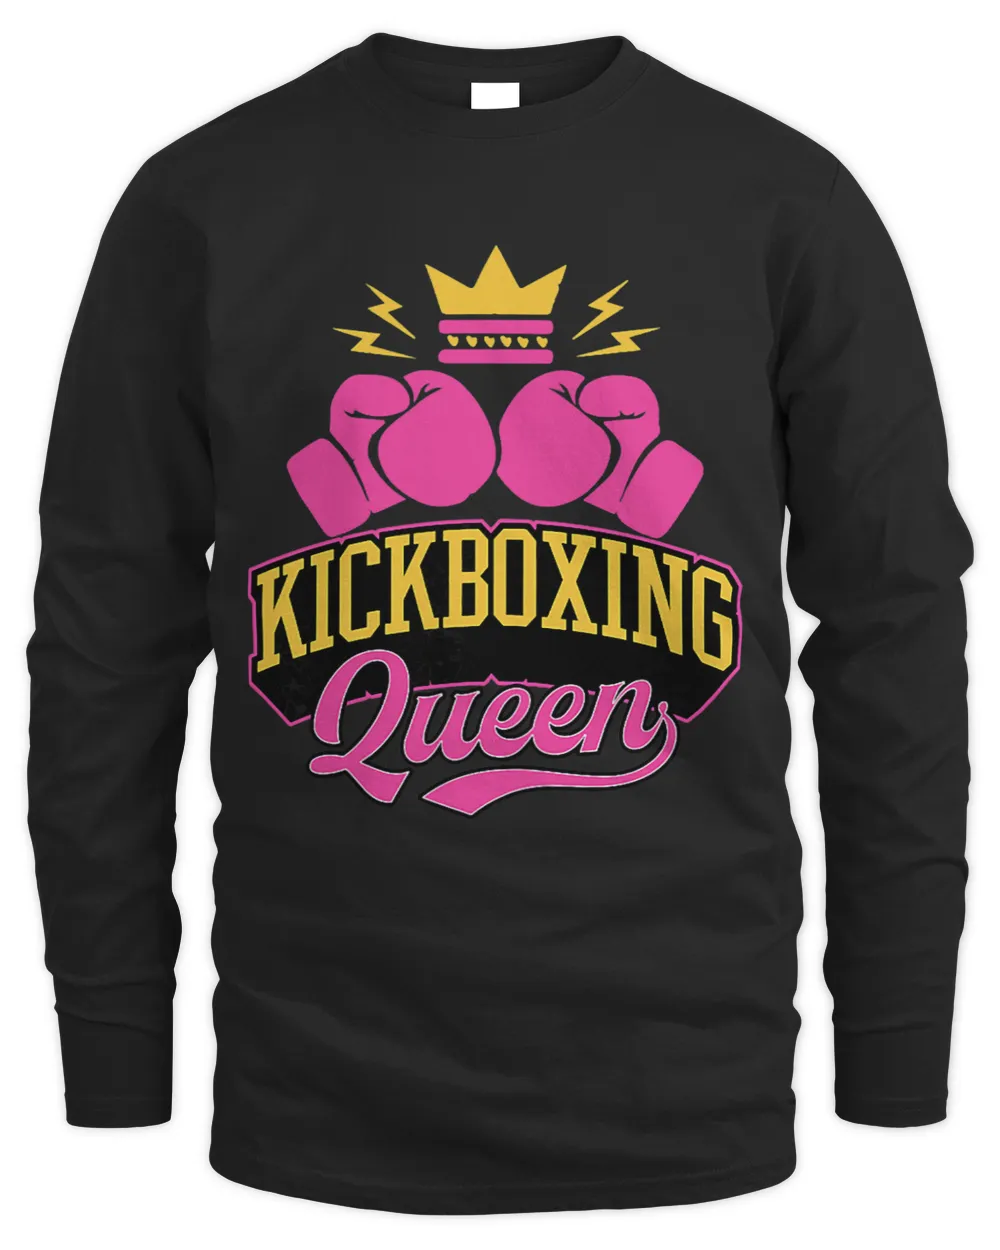 Womens Kickboxing Queen Cute Funny Royal Crown Karate Boxing